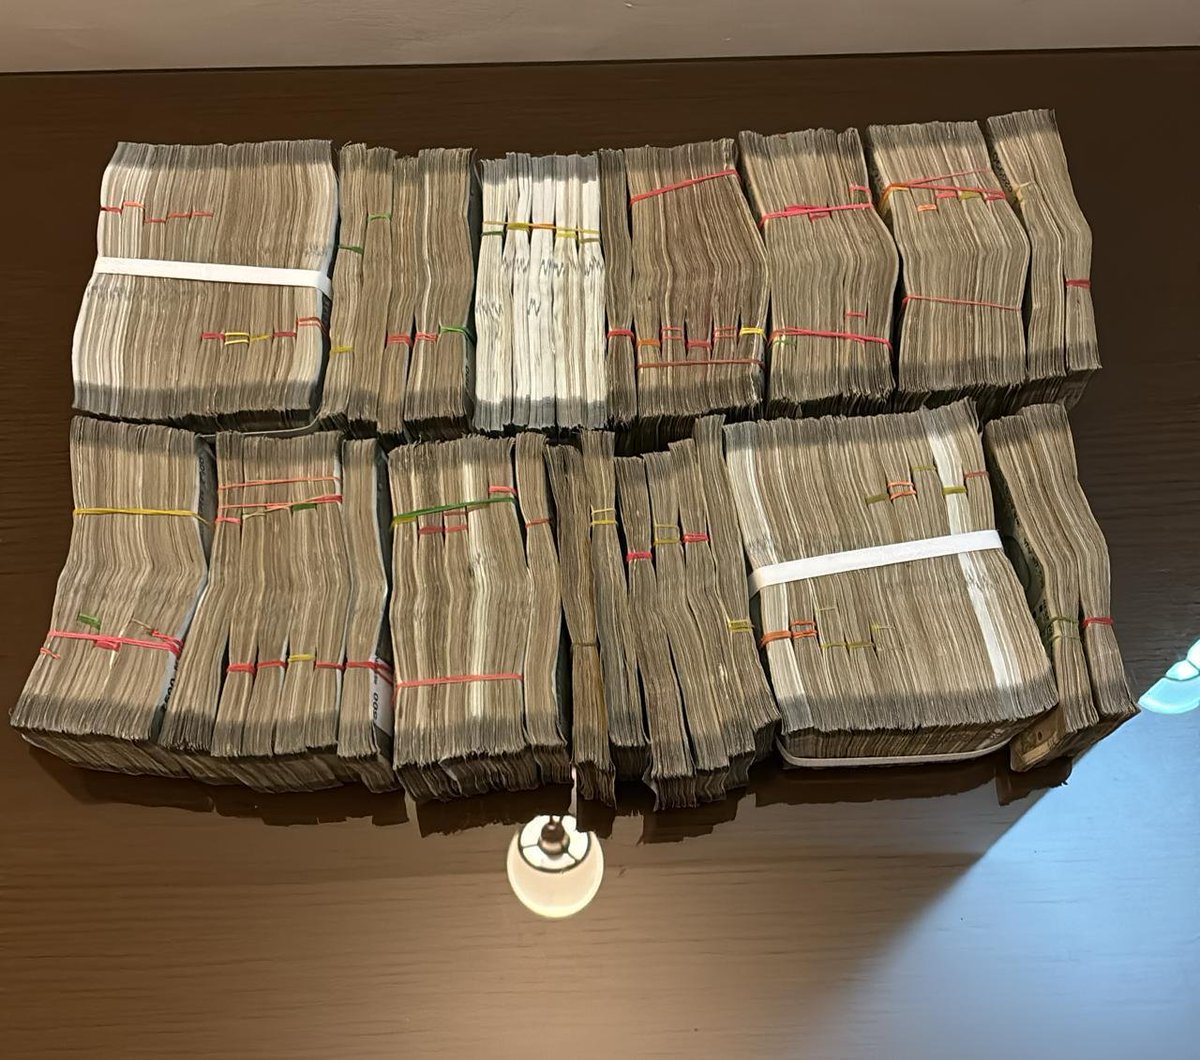 Jharkhand CM Hemant Soren remains untraceable. Enforcement Directorate has recovered Rs 36 lakhs in cash and also seized two cars from the Delhi residence of Jharkhand CM Hemant Soren during the probe into a money laundering case linked to an alleged land scam: Sources